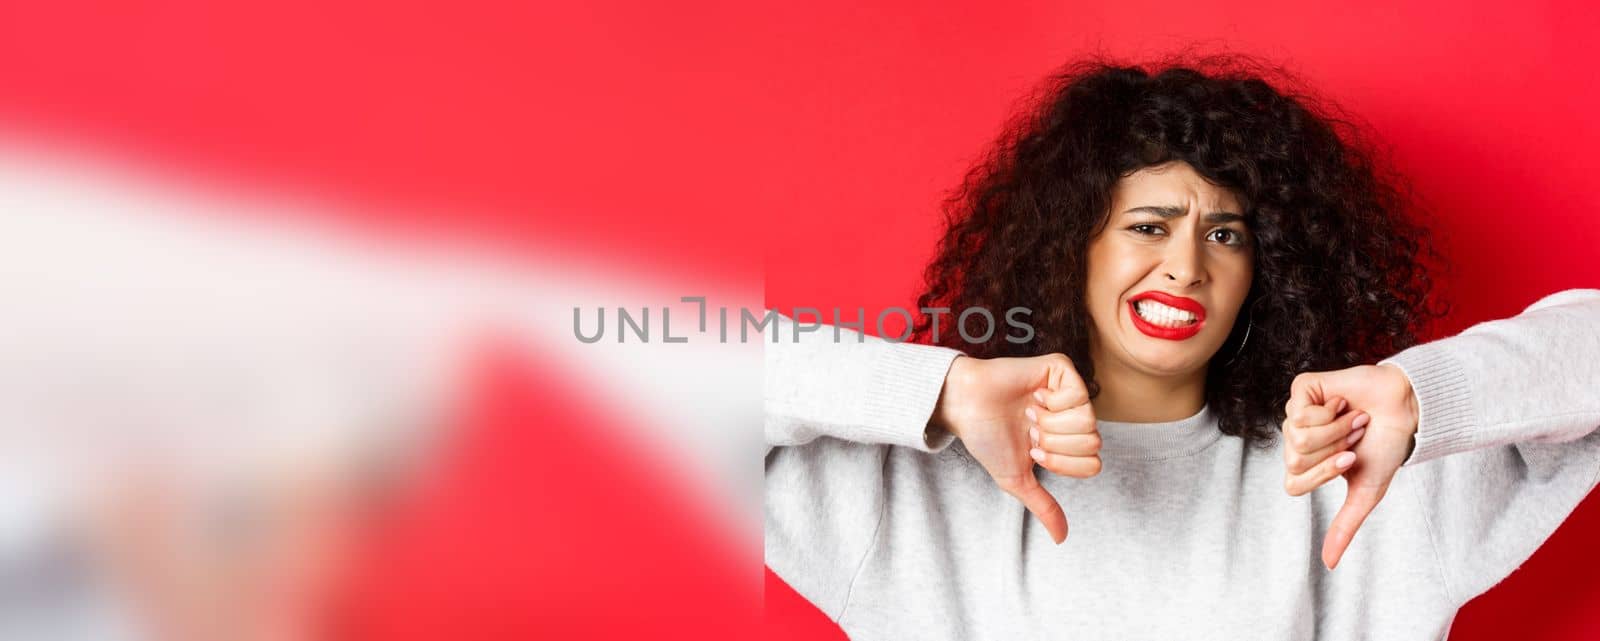 Close-up portrait of disappointed woman grimacing, cringe from something bad, showing thumbs-down, dislike and disapprove, standing on red background.